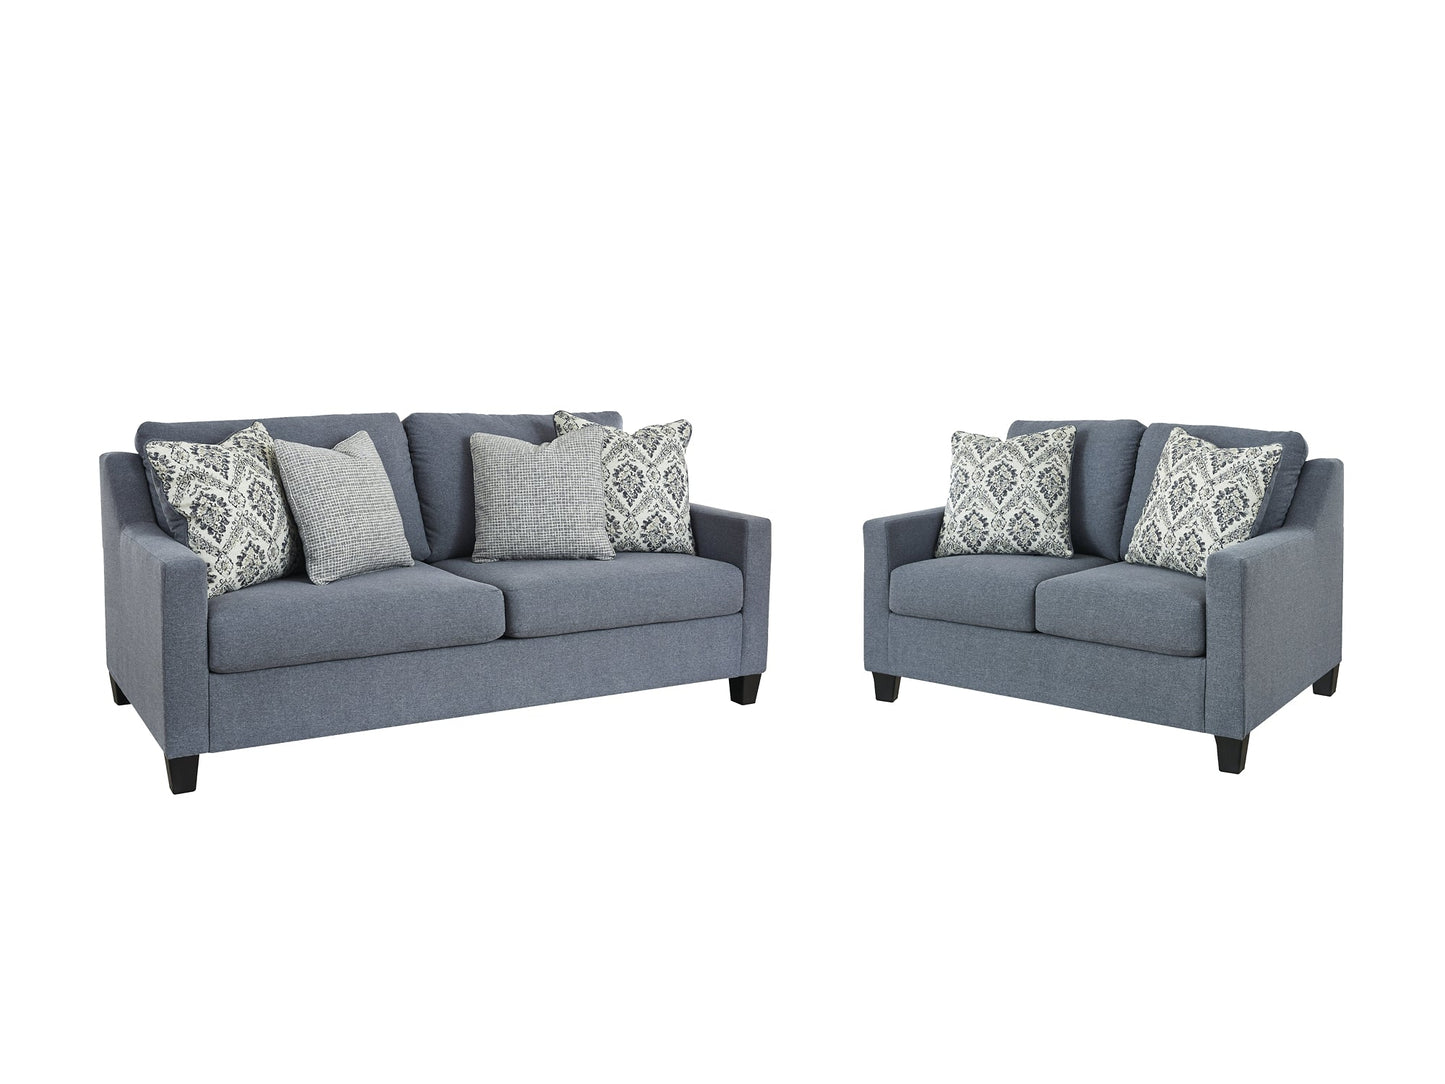 Lemly Sofa and Loveseat at Cloud 9 Mattress & Furniture furniture, home furnishing, home decor